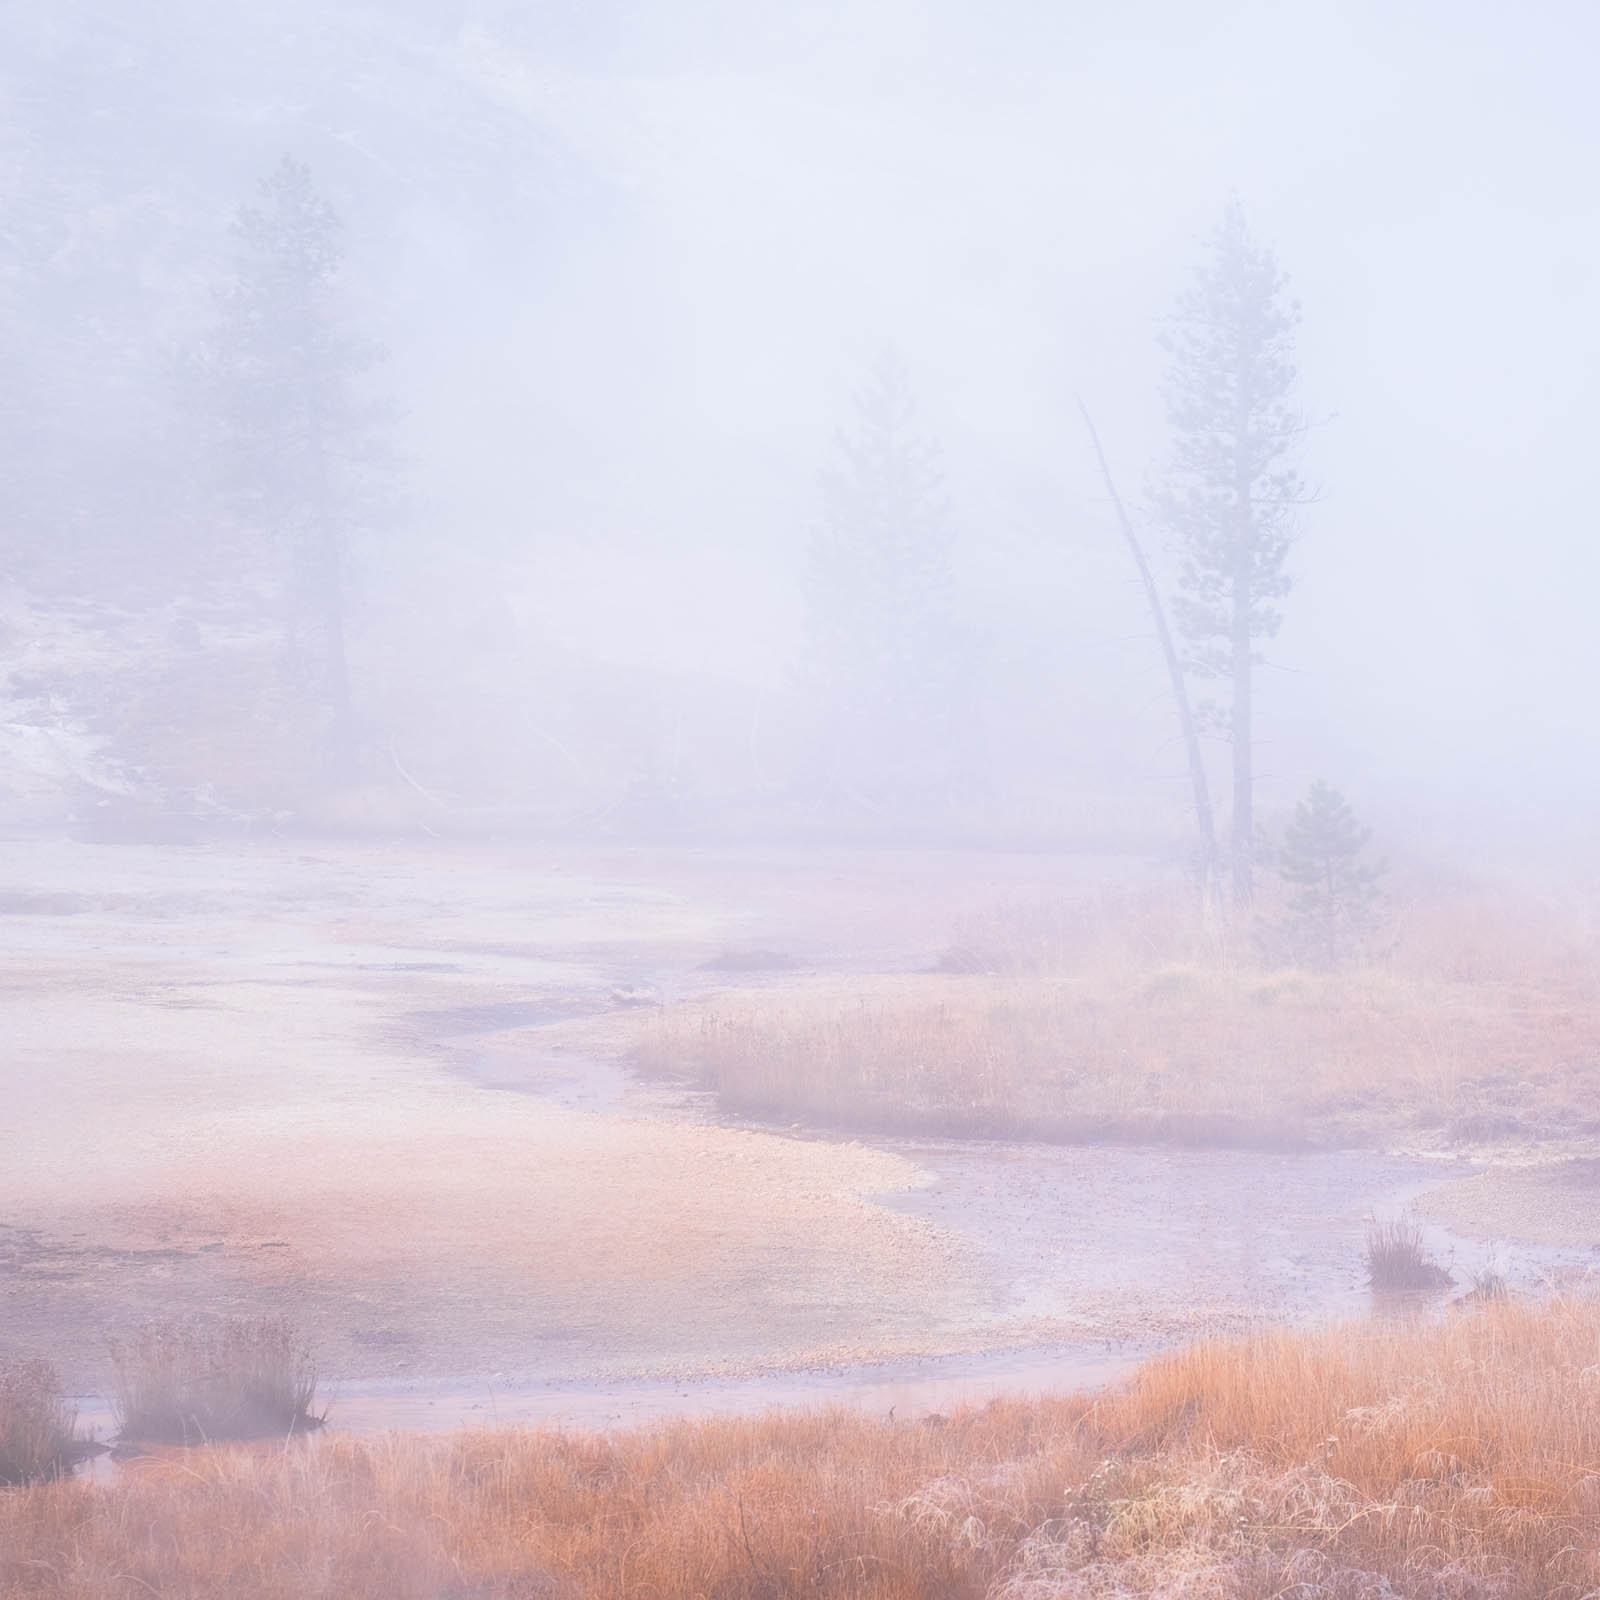 Steaming winding river in Yellowstone National Park